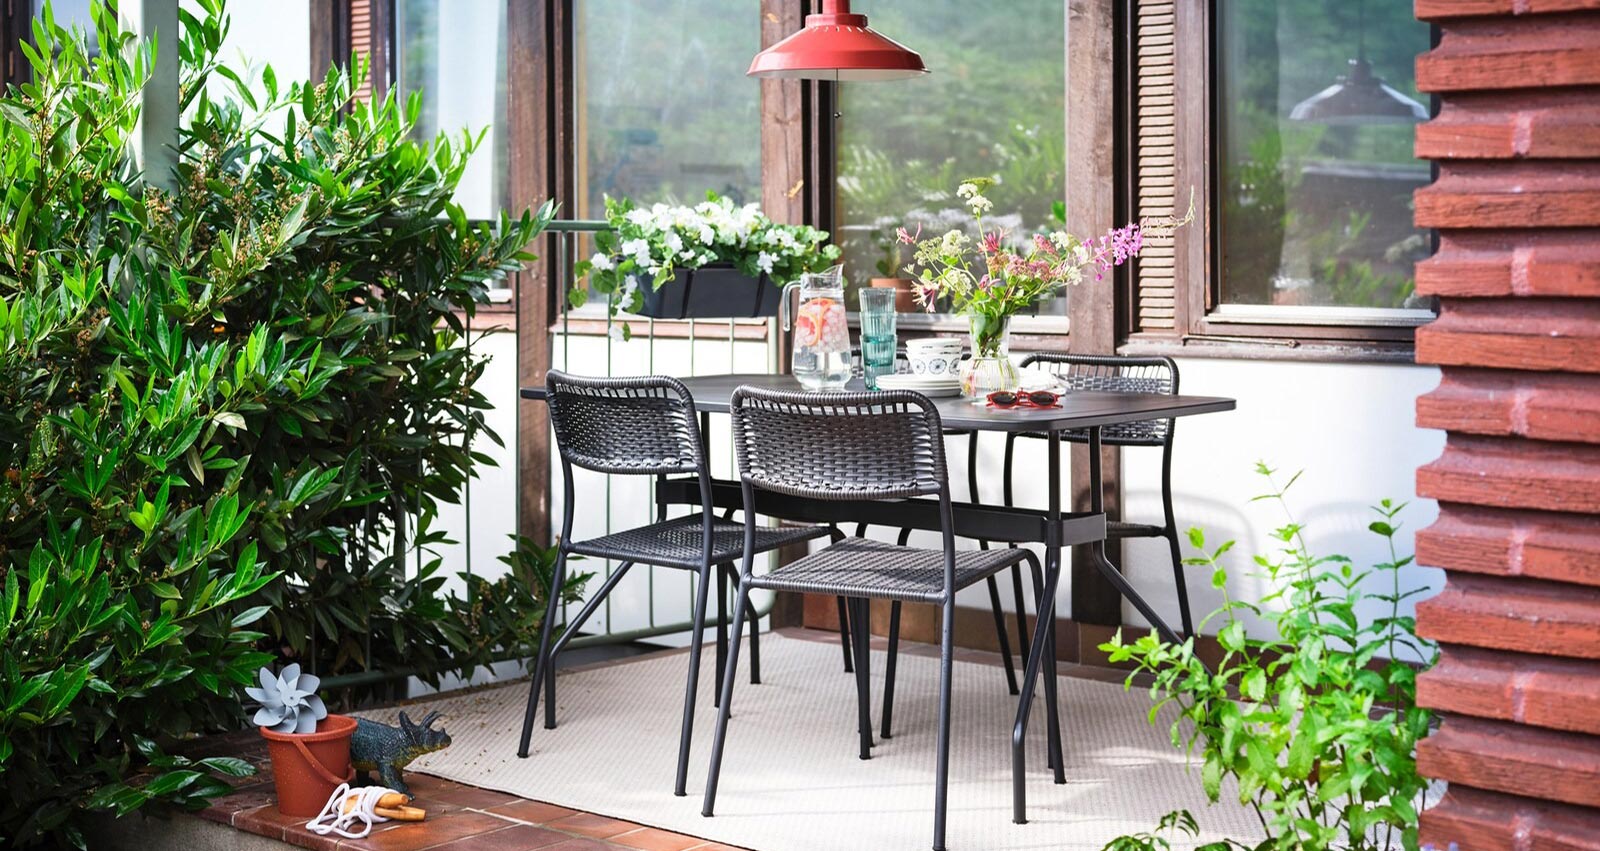 IKEA-a terrace for gathering and growing 01